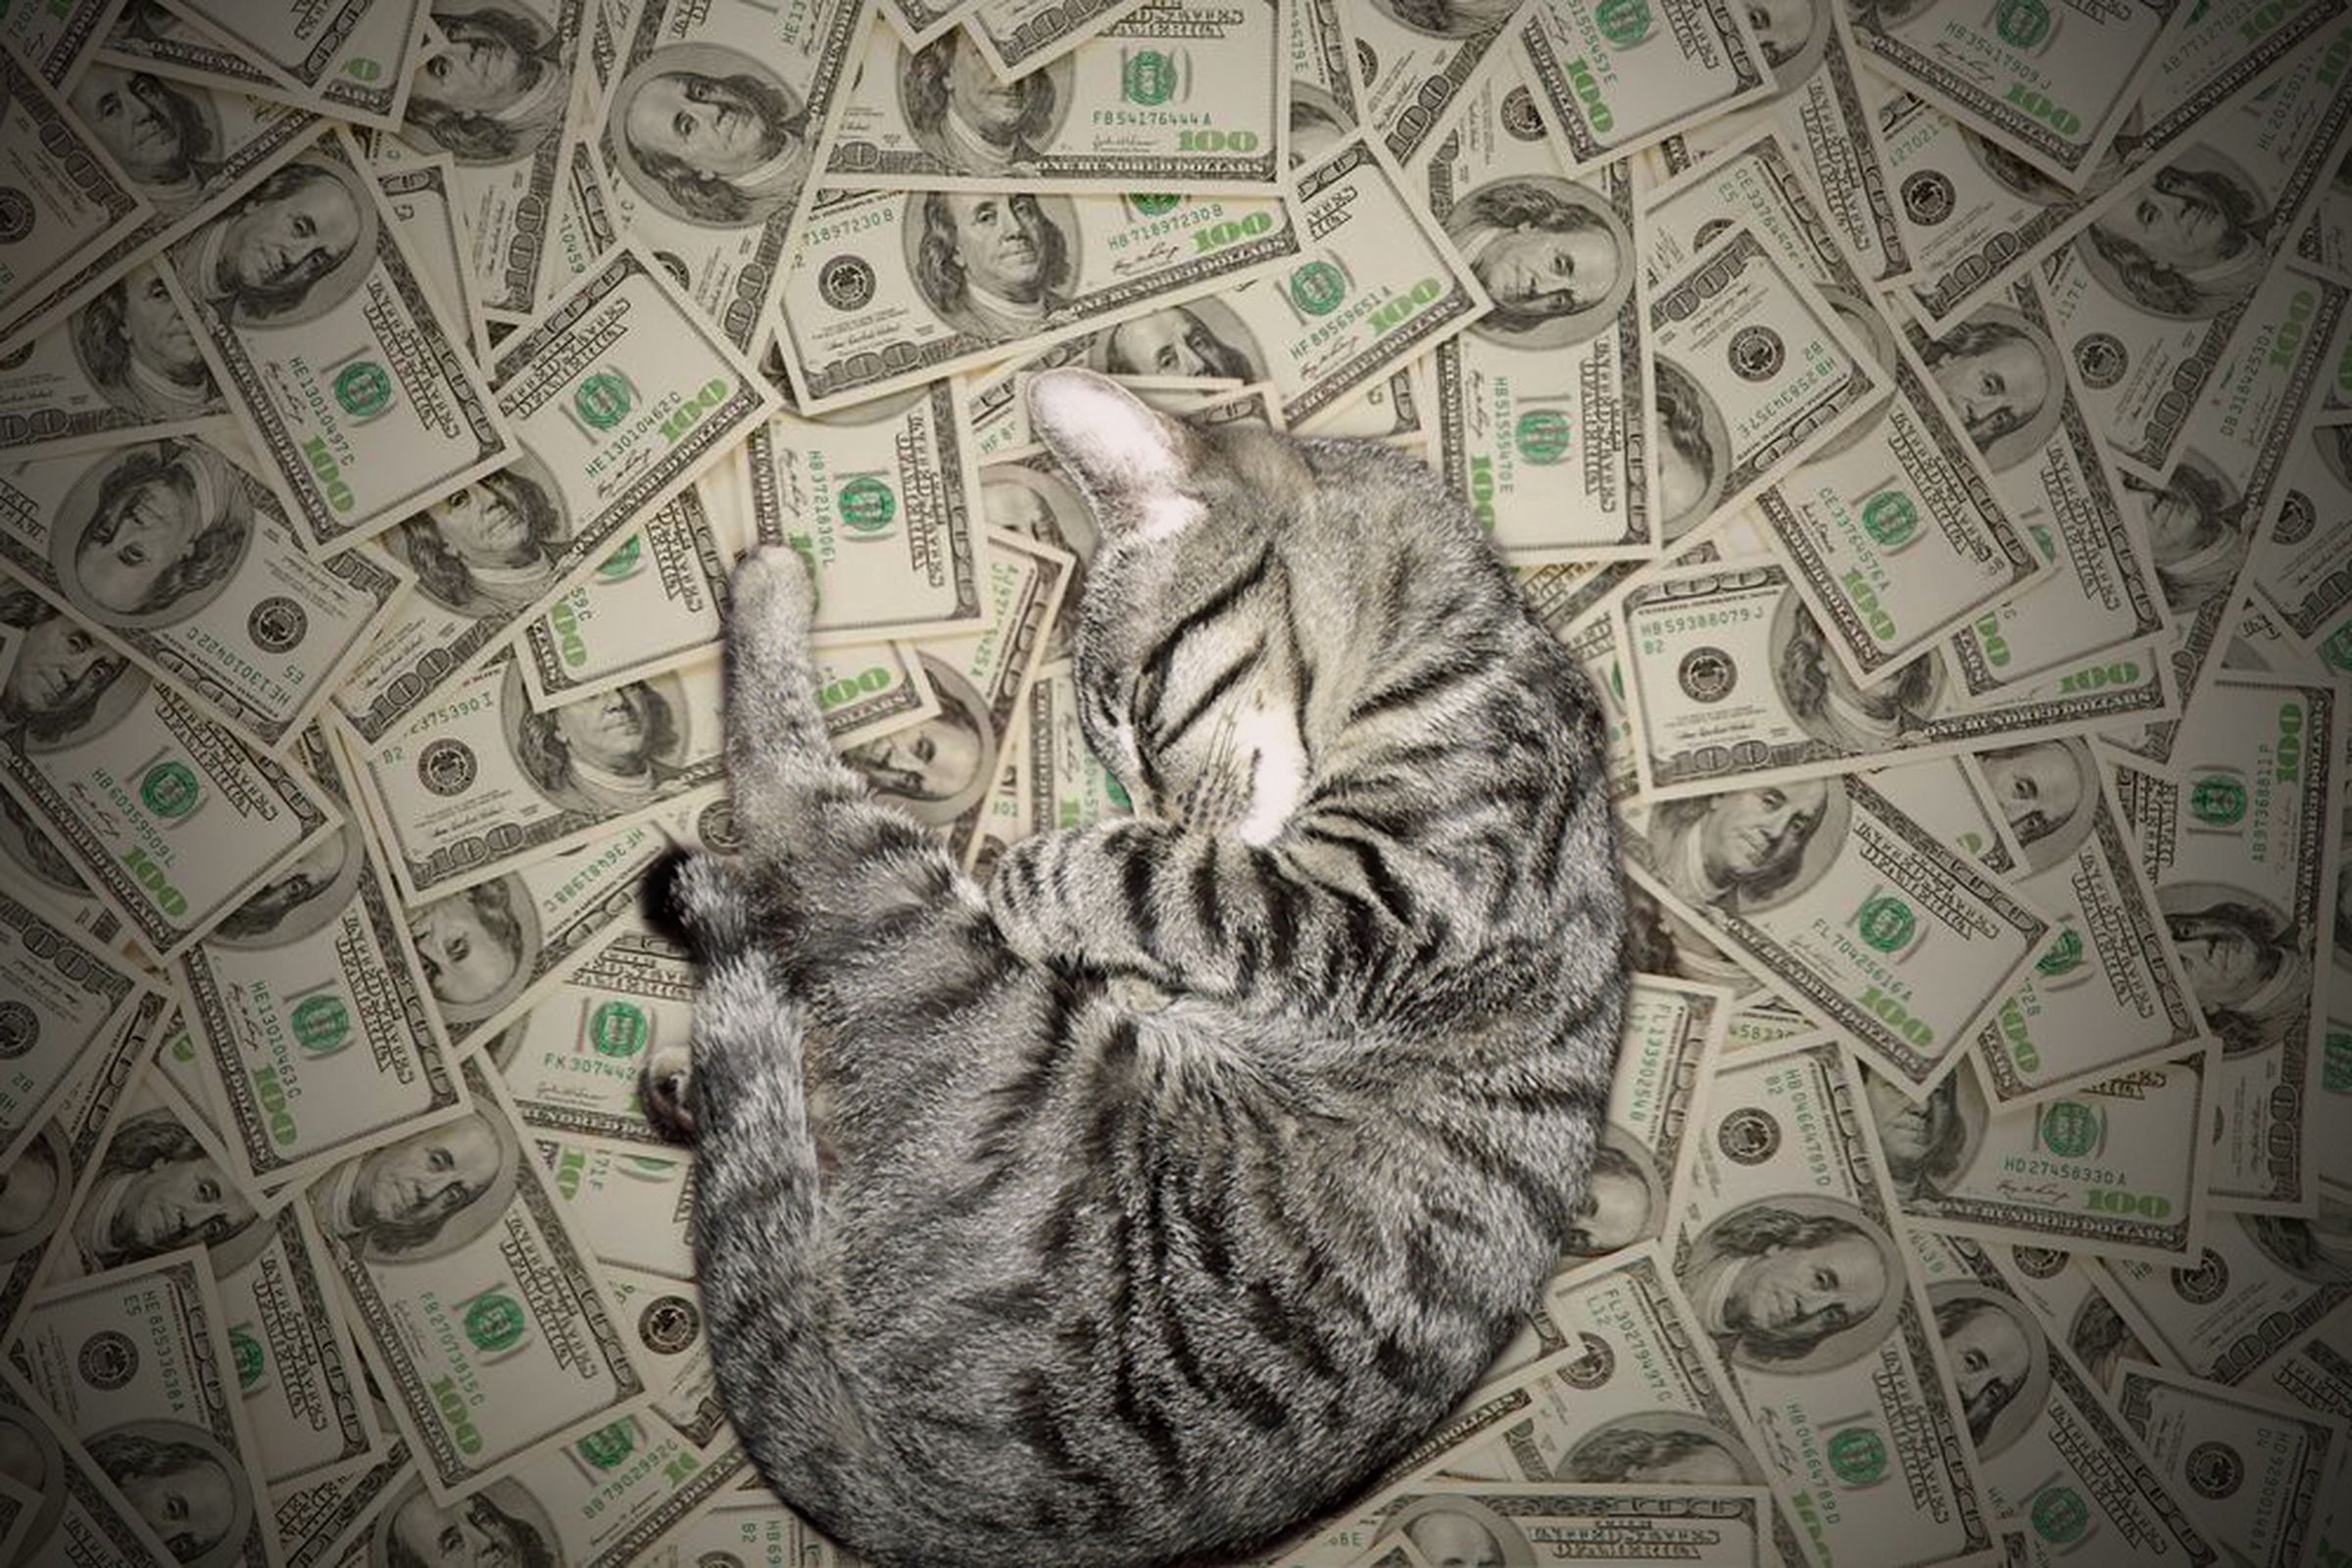 A cashcat from the popular Tumblr Cashcats.biz, which did not make the list because it features an assortment of cats